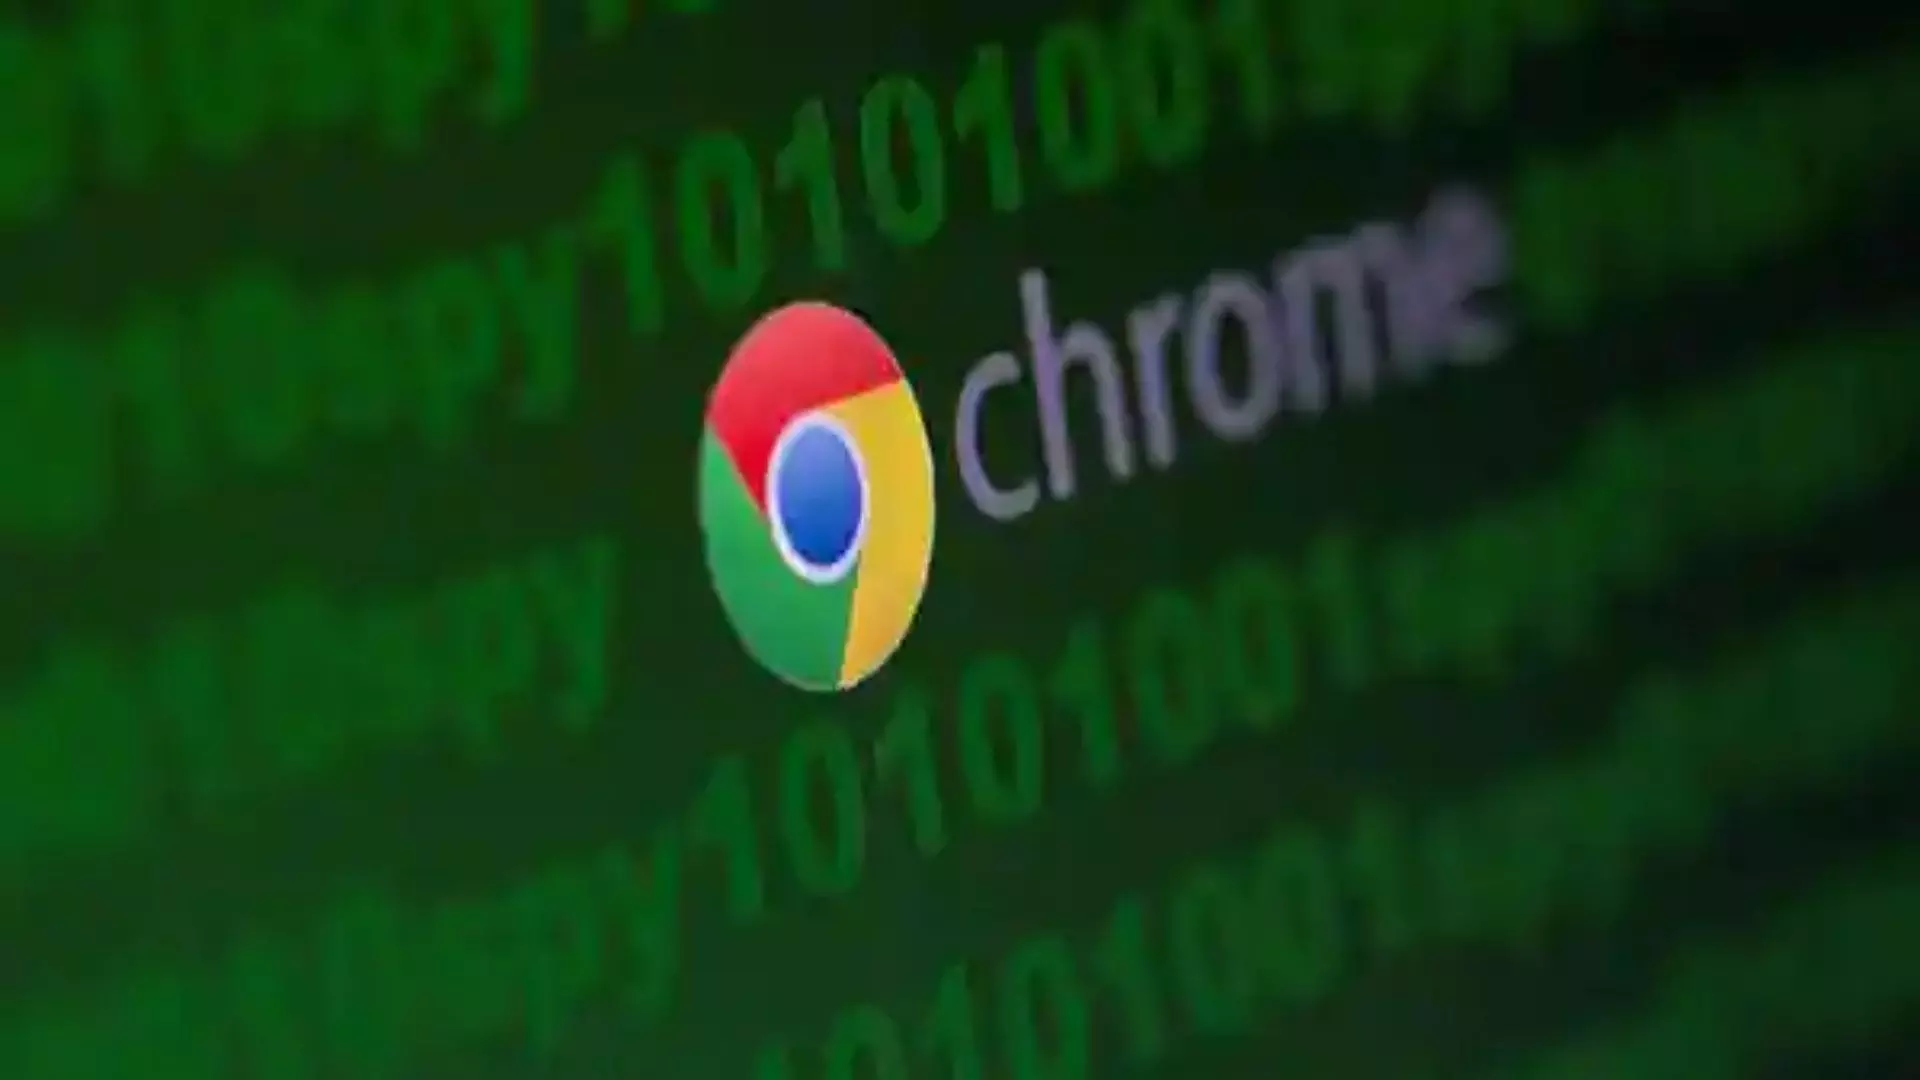 Cert-in Alerts to Android And Windows Users to Update the Google Chrome Version 92 to Avoid Hacking